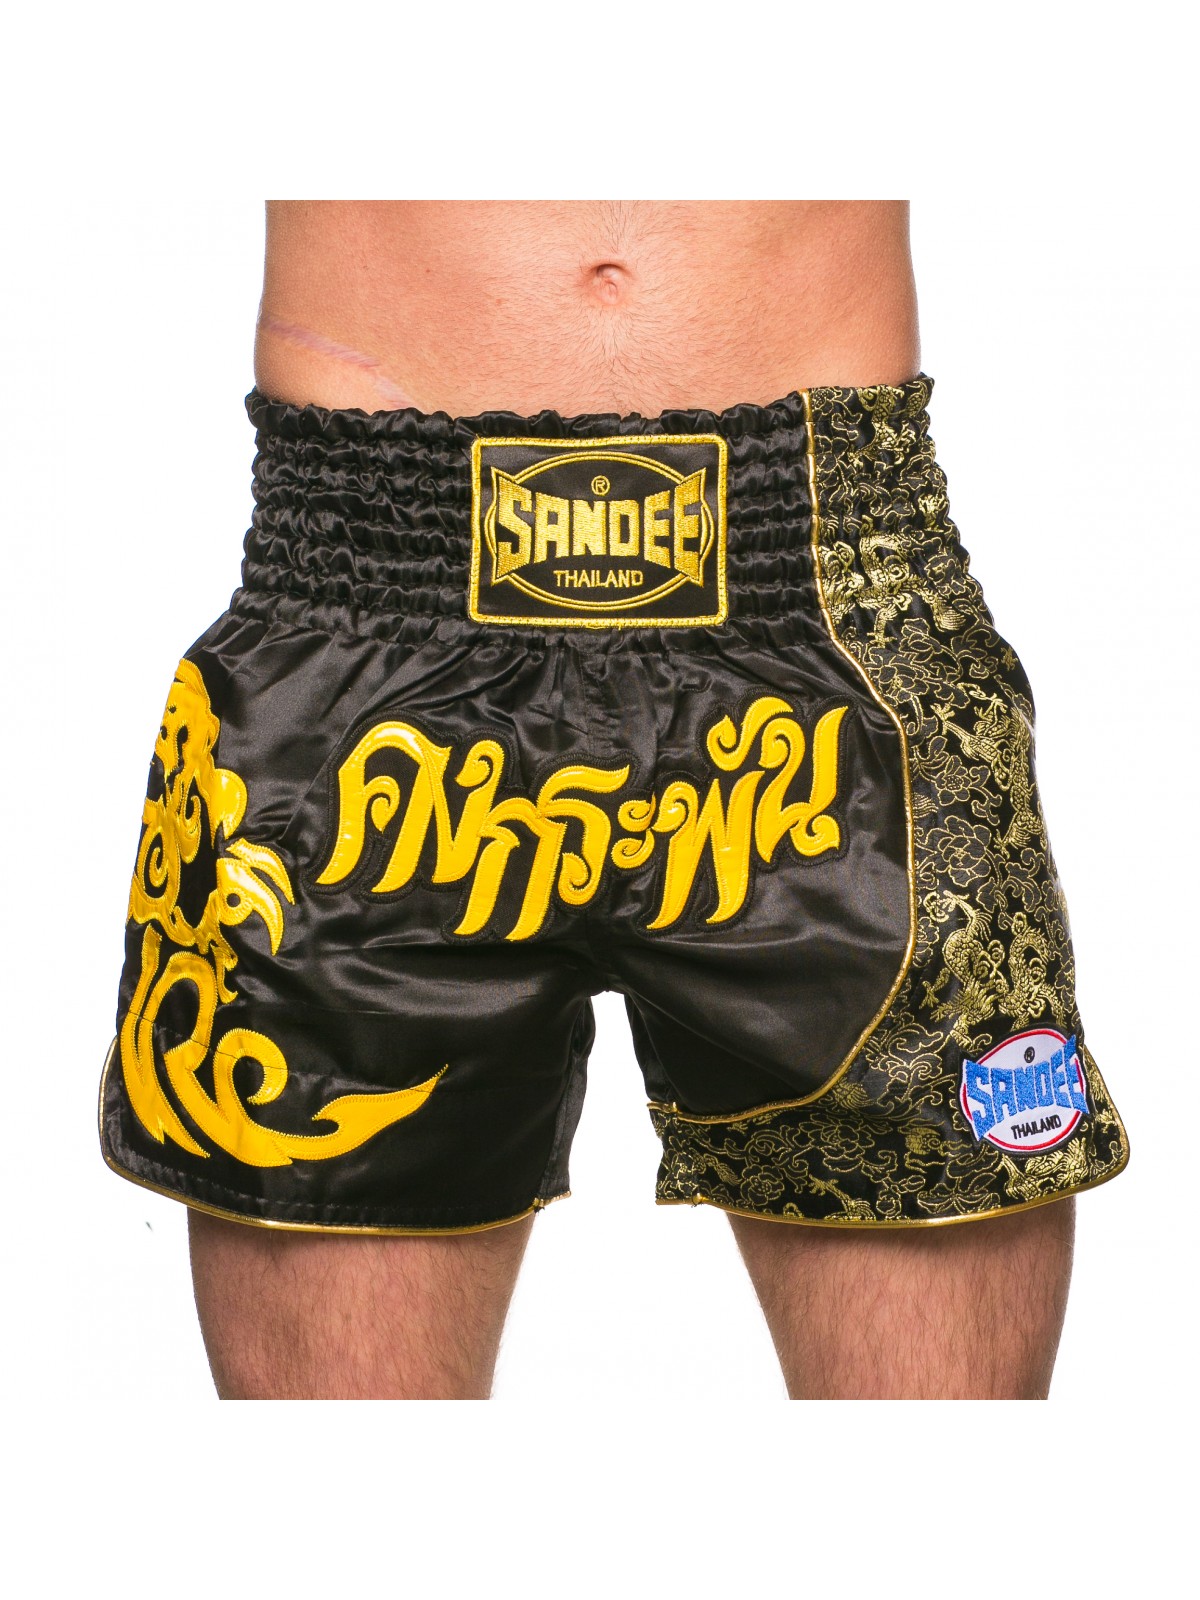 Details about   Sandee Unbreakable Muay Thai Shorts Black Martial Arts Training Trunks 